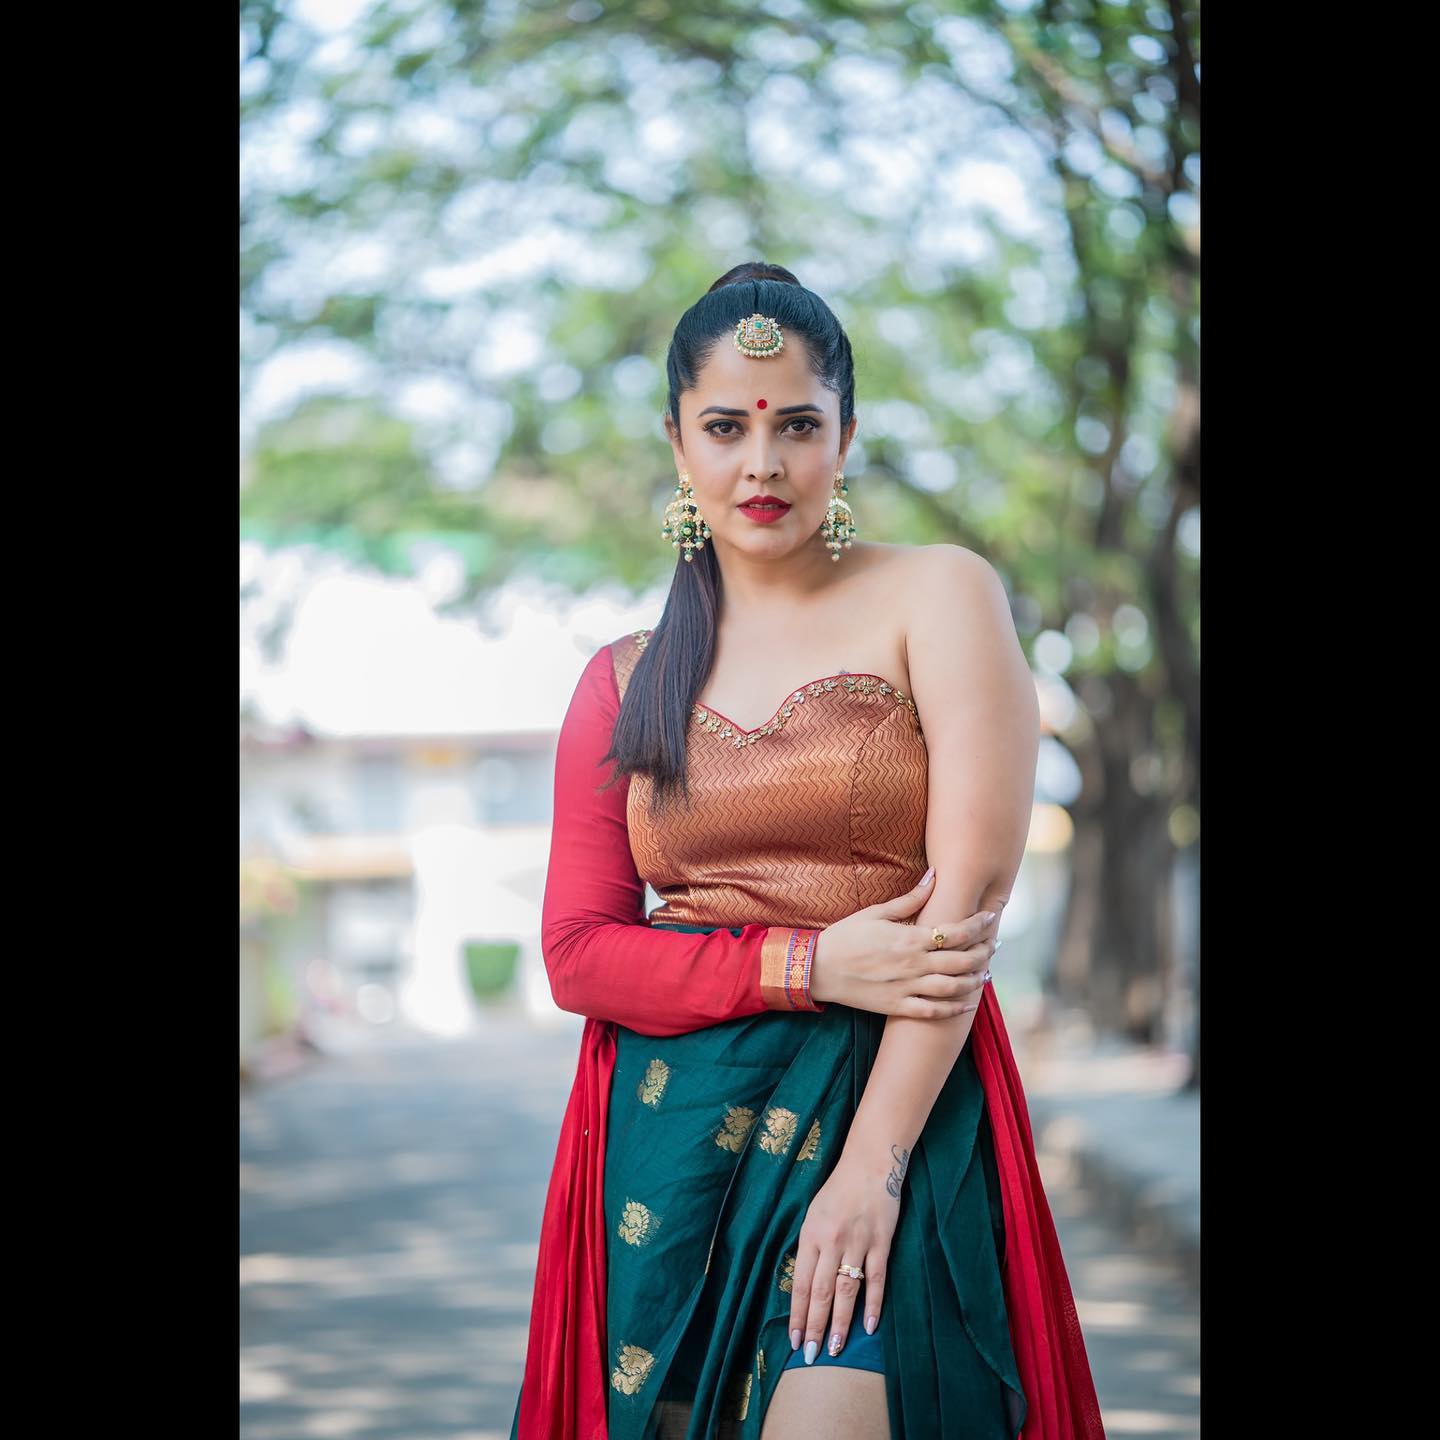 Anasuya sets hearts on fire with her beautiful pictures